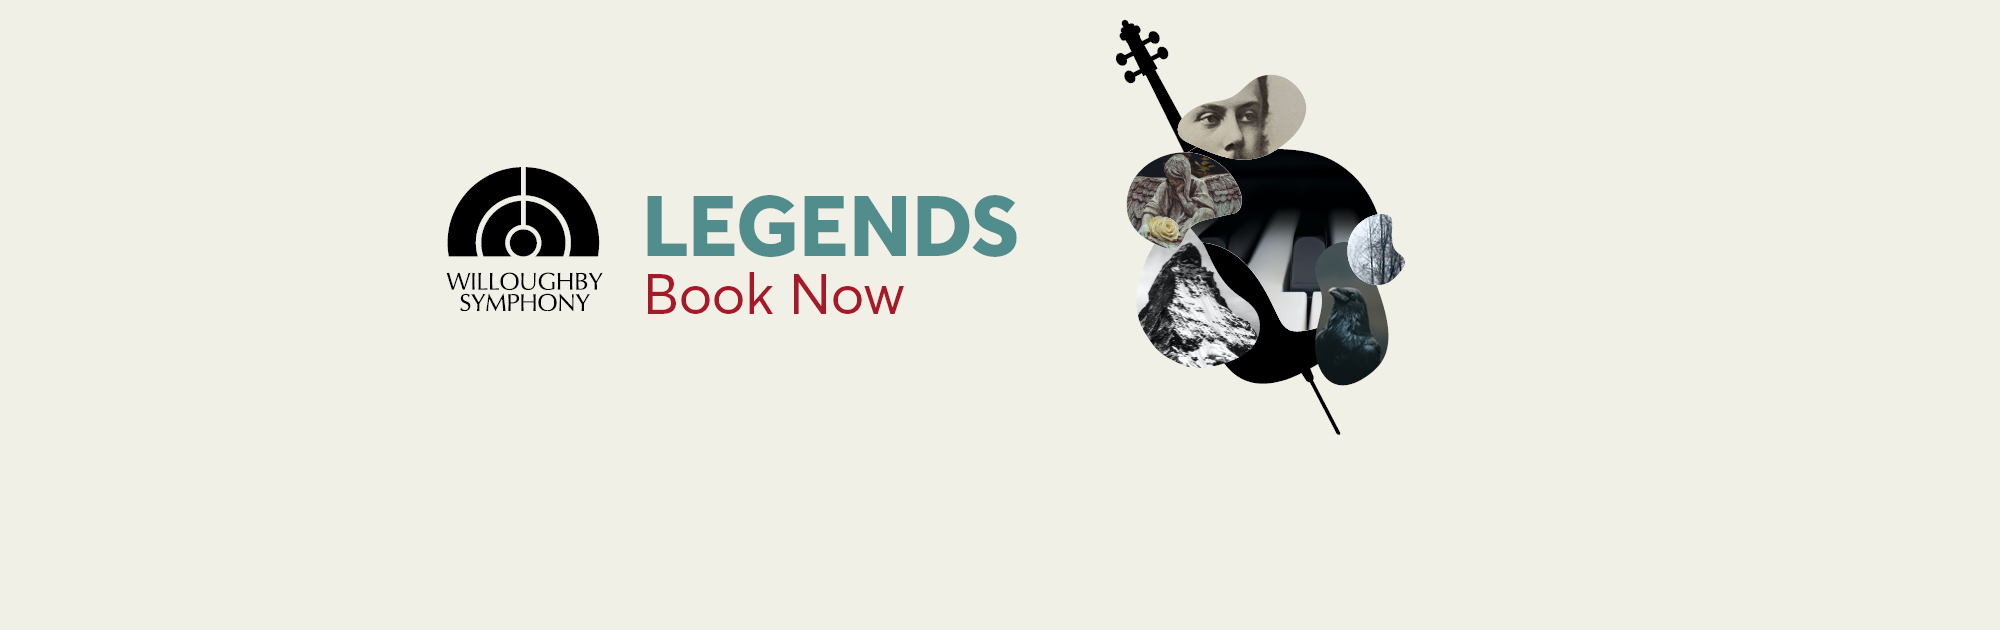 Willoughby Symphony - Legends - Book Now